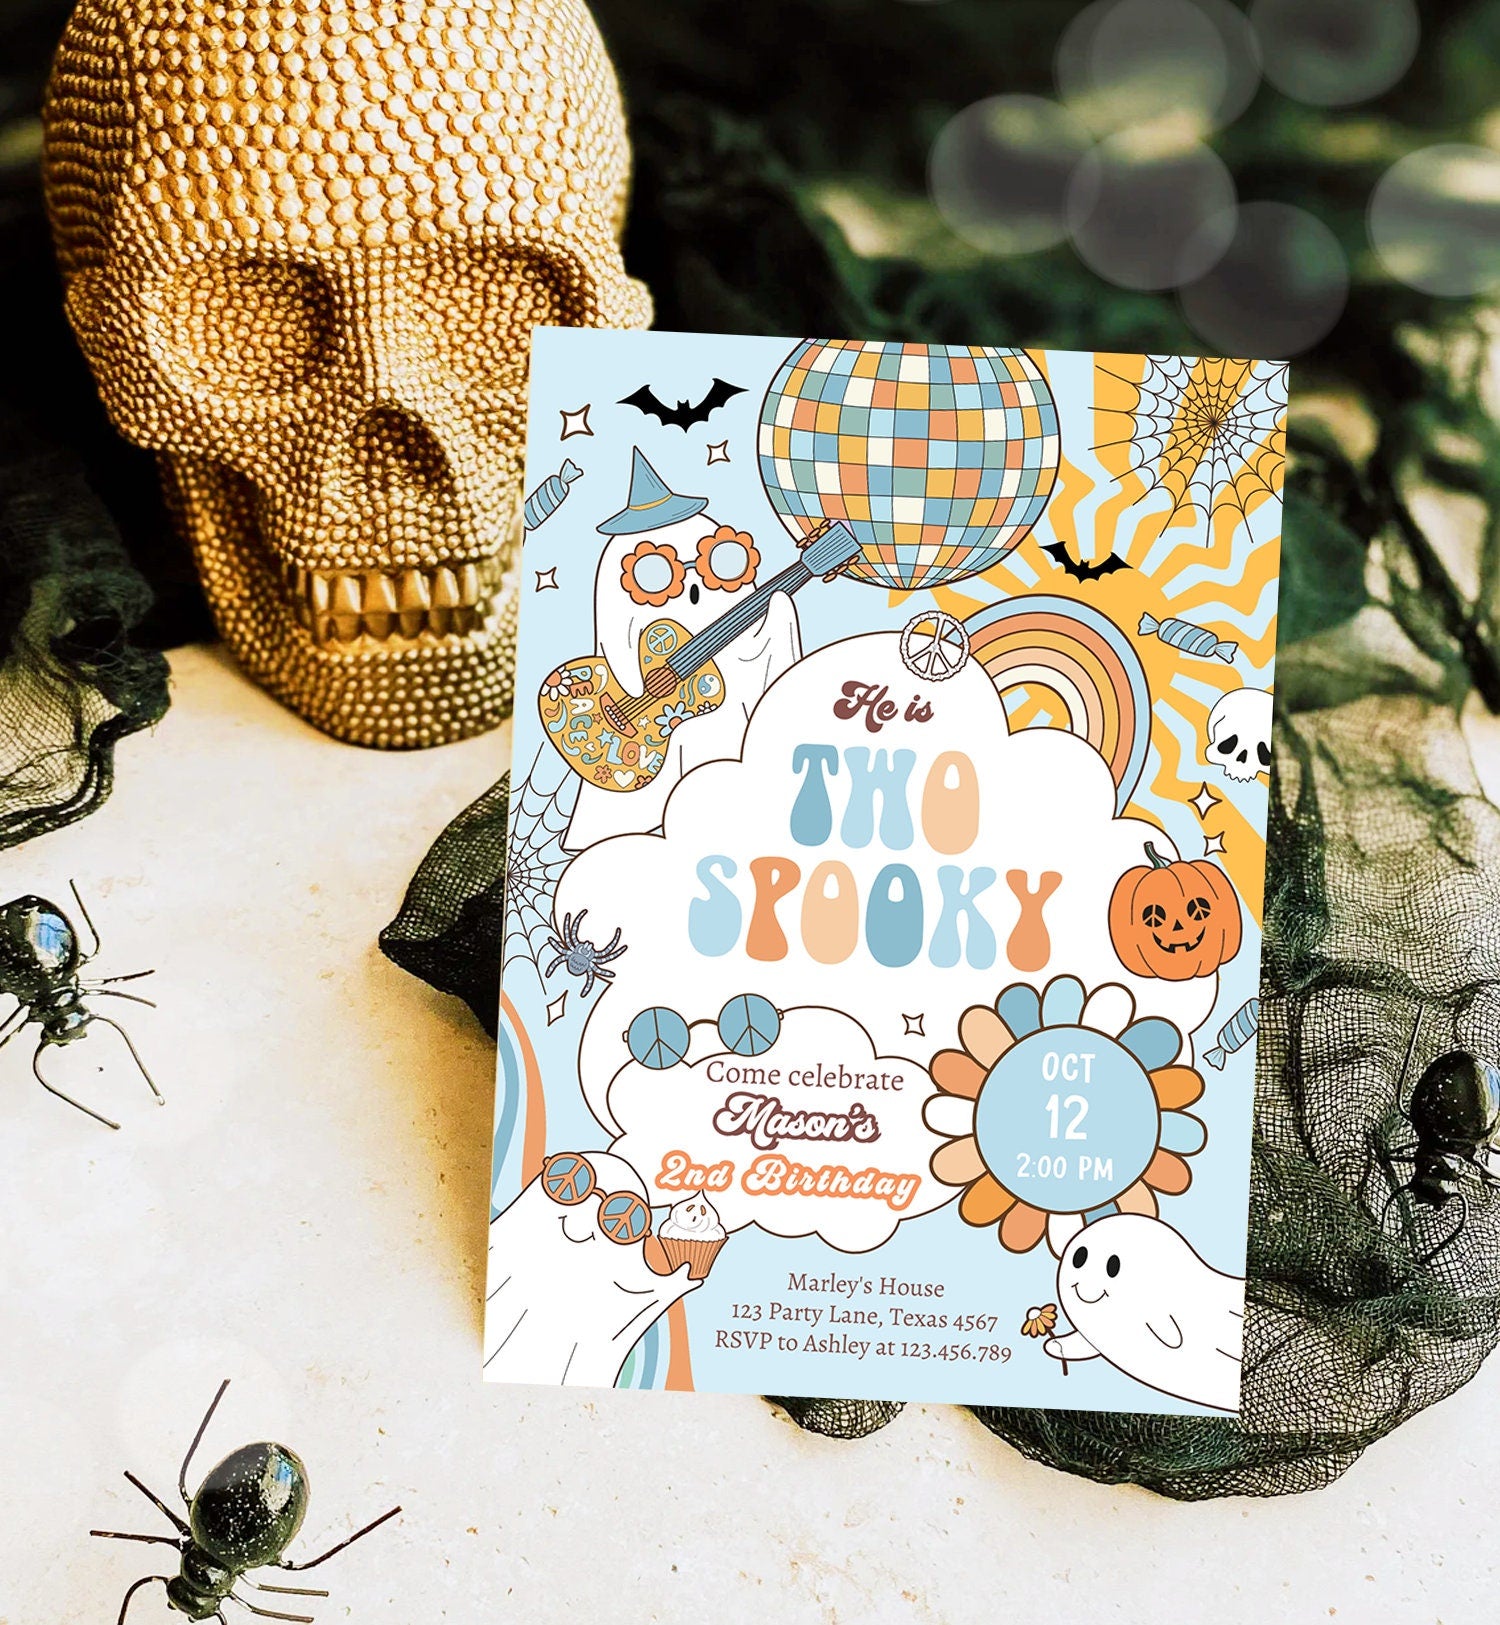 Editable Groovy Halloween Two Spooky Second Birthday Invitation Boy Ghost Party Blue Boo Spooktacular Party Printable Template Corjl 0471